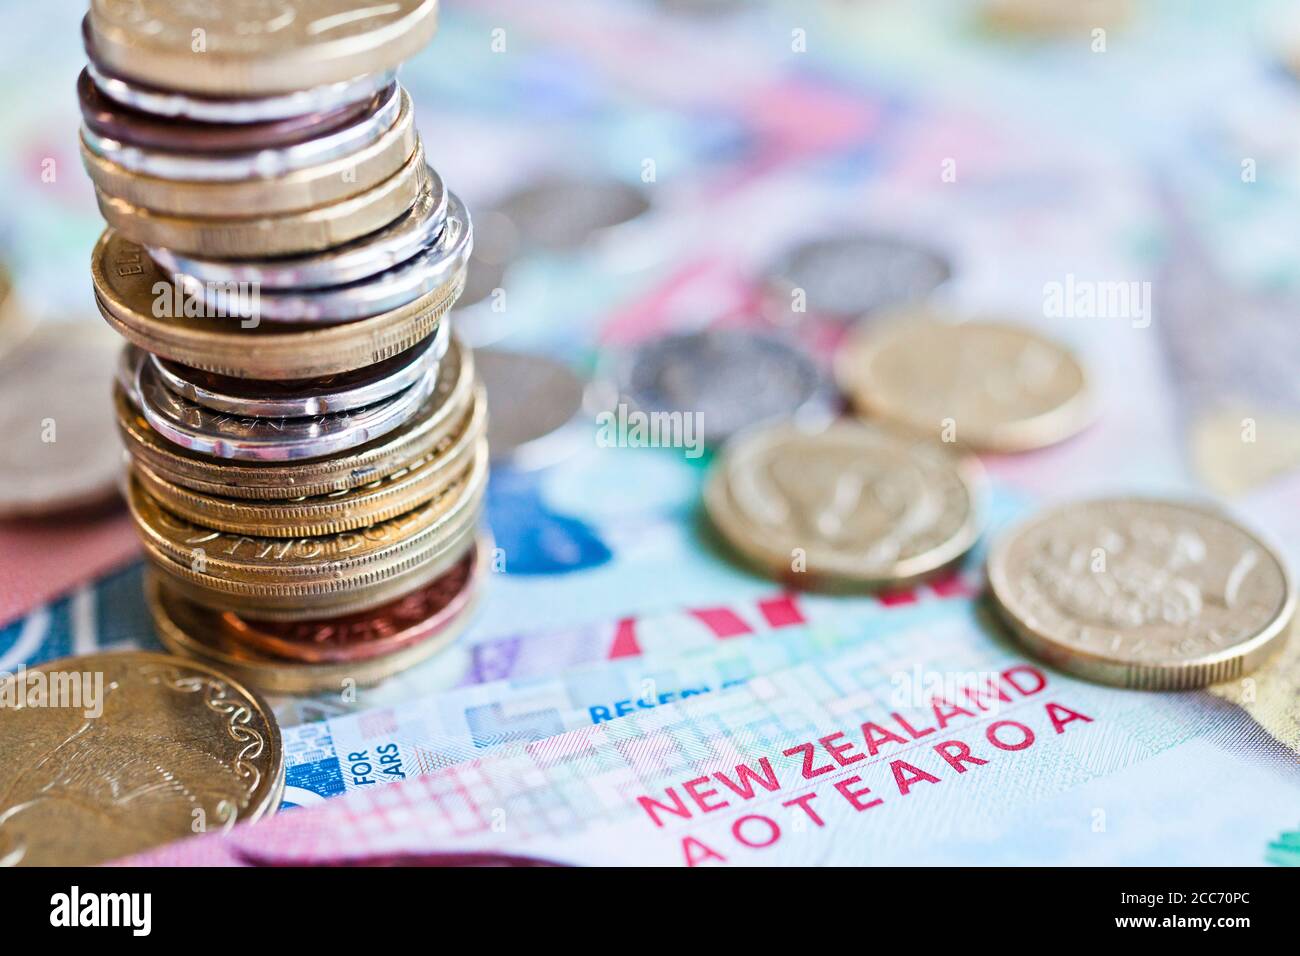 New Zealand cash, money or currency. Notes and coins Stock Photo